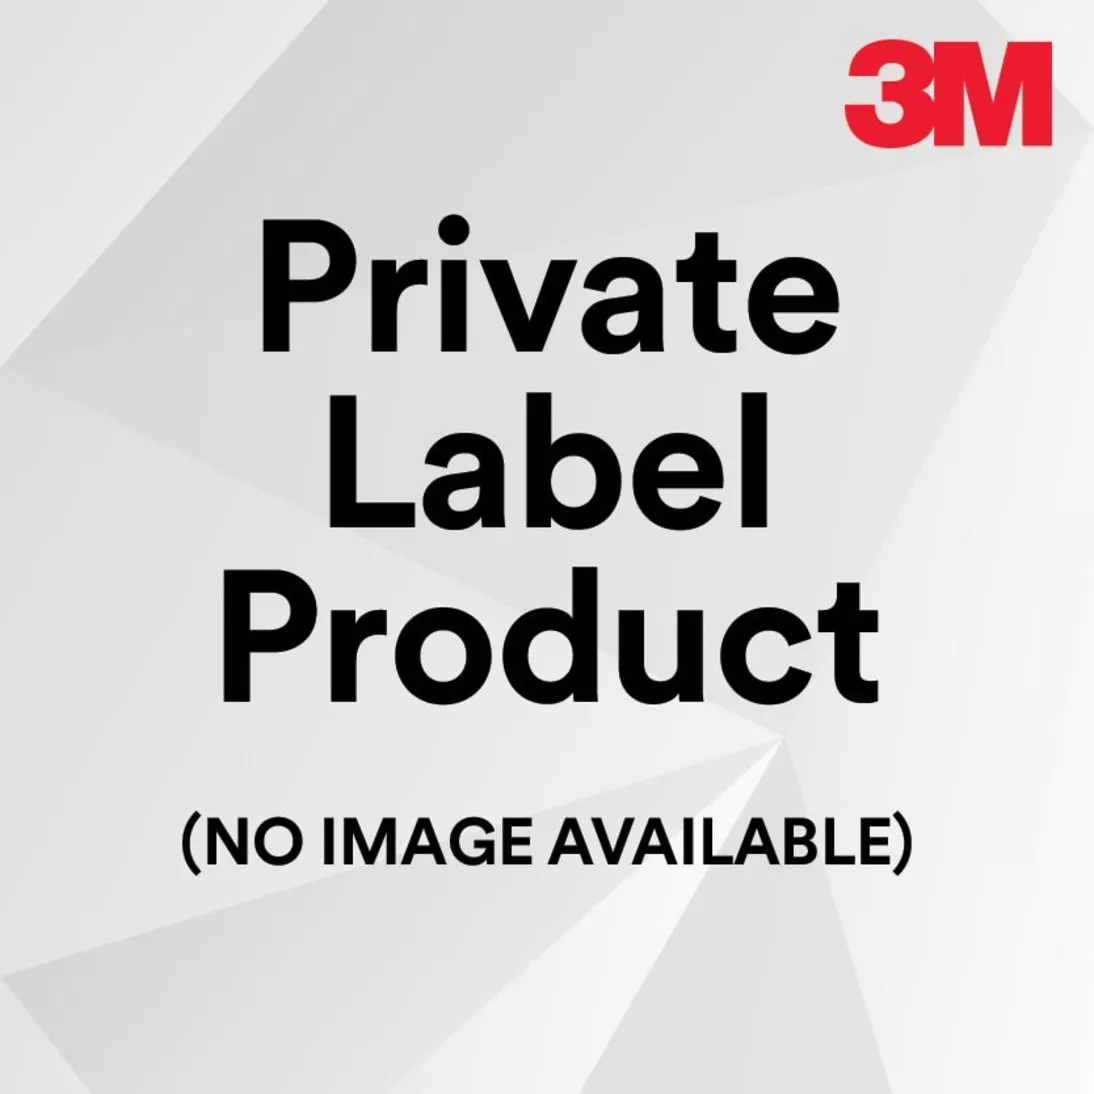 3M™ Scotchcal™ ElectroCut™ Graphic Film 220-15, Bright Yellow, P27873A,
15 in x 250 yd